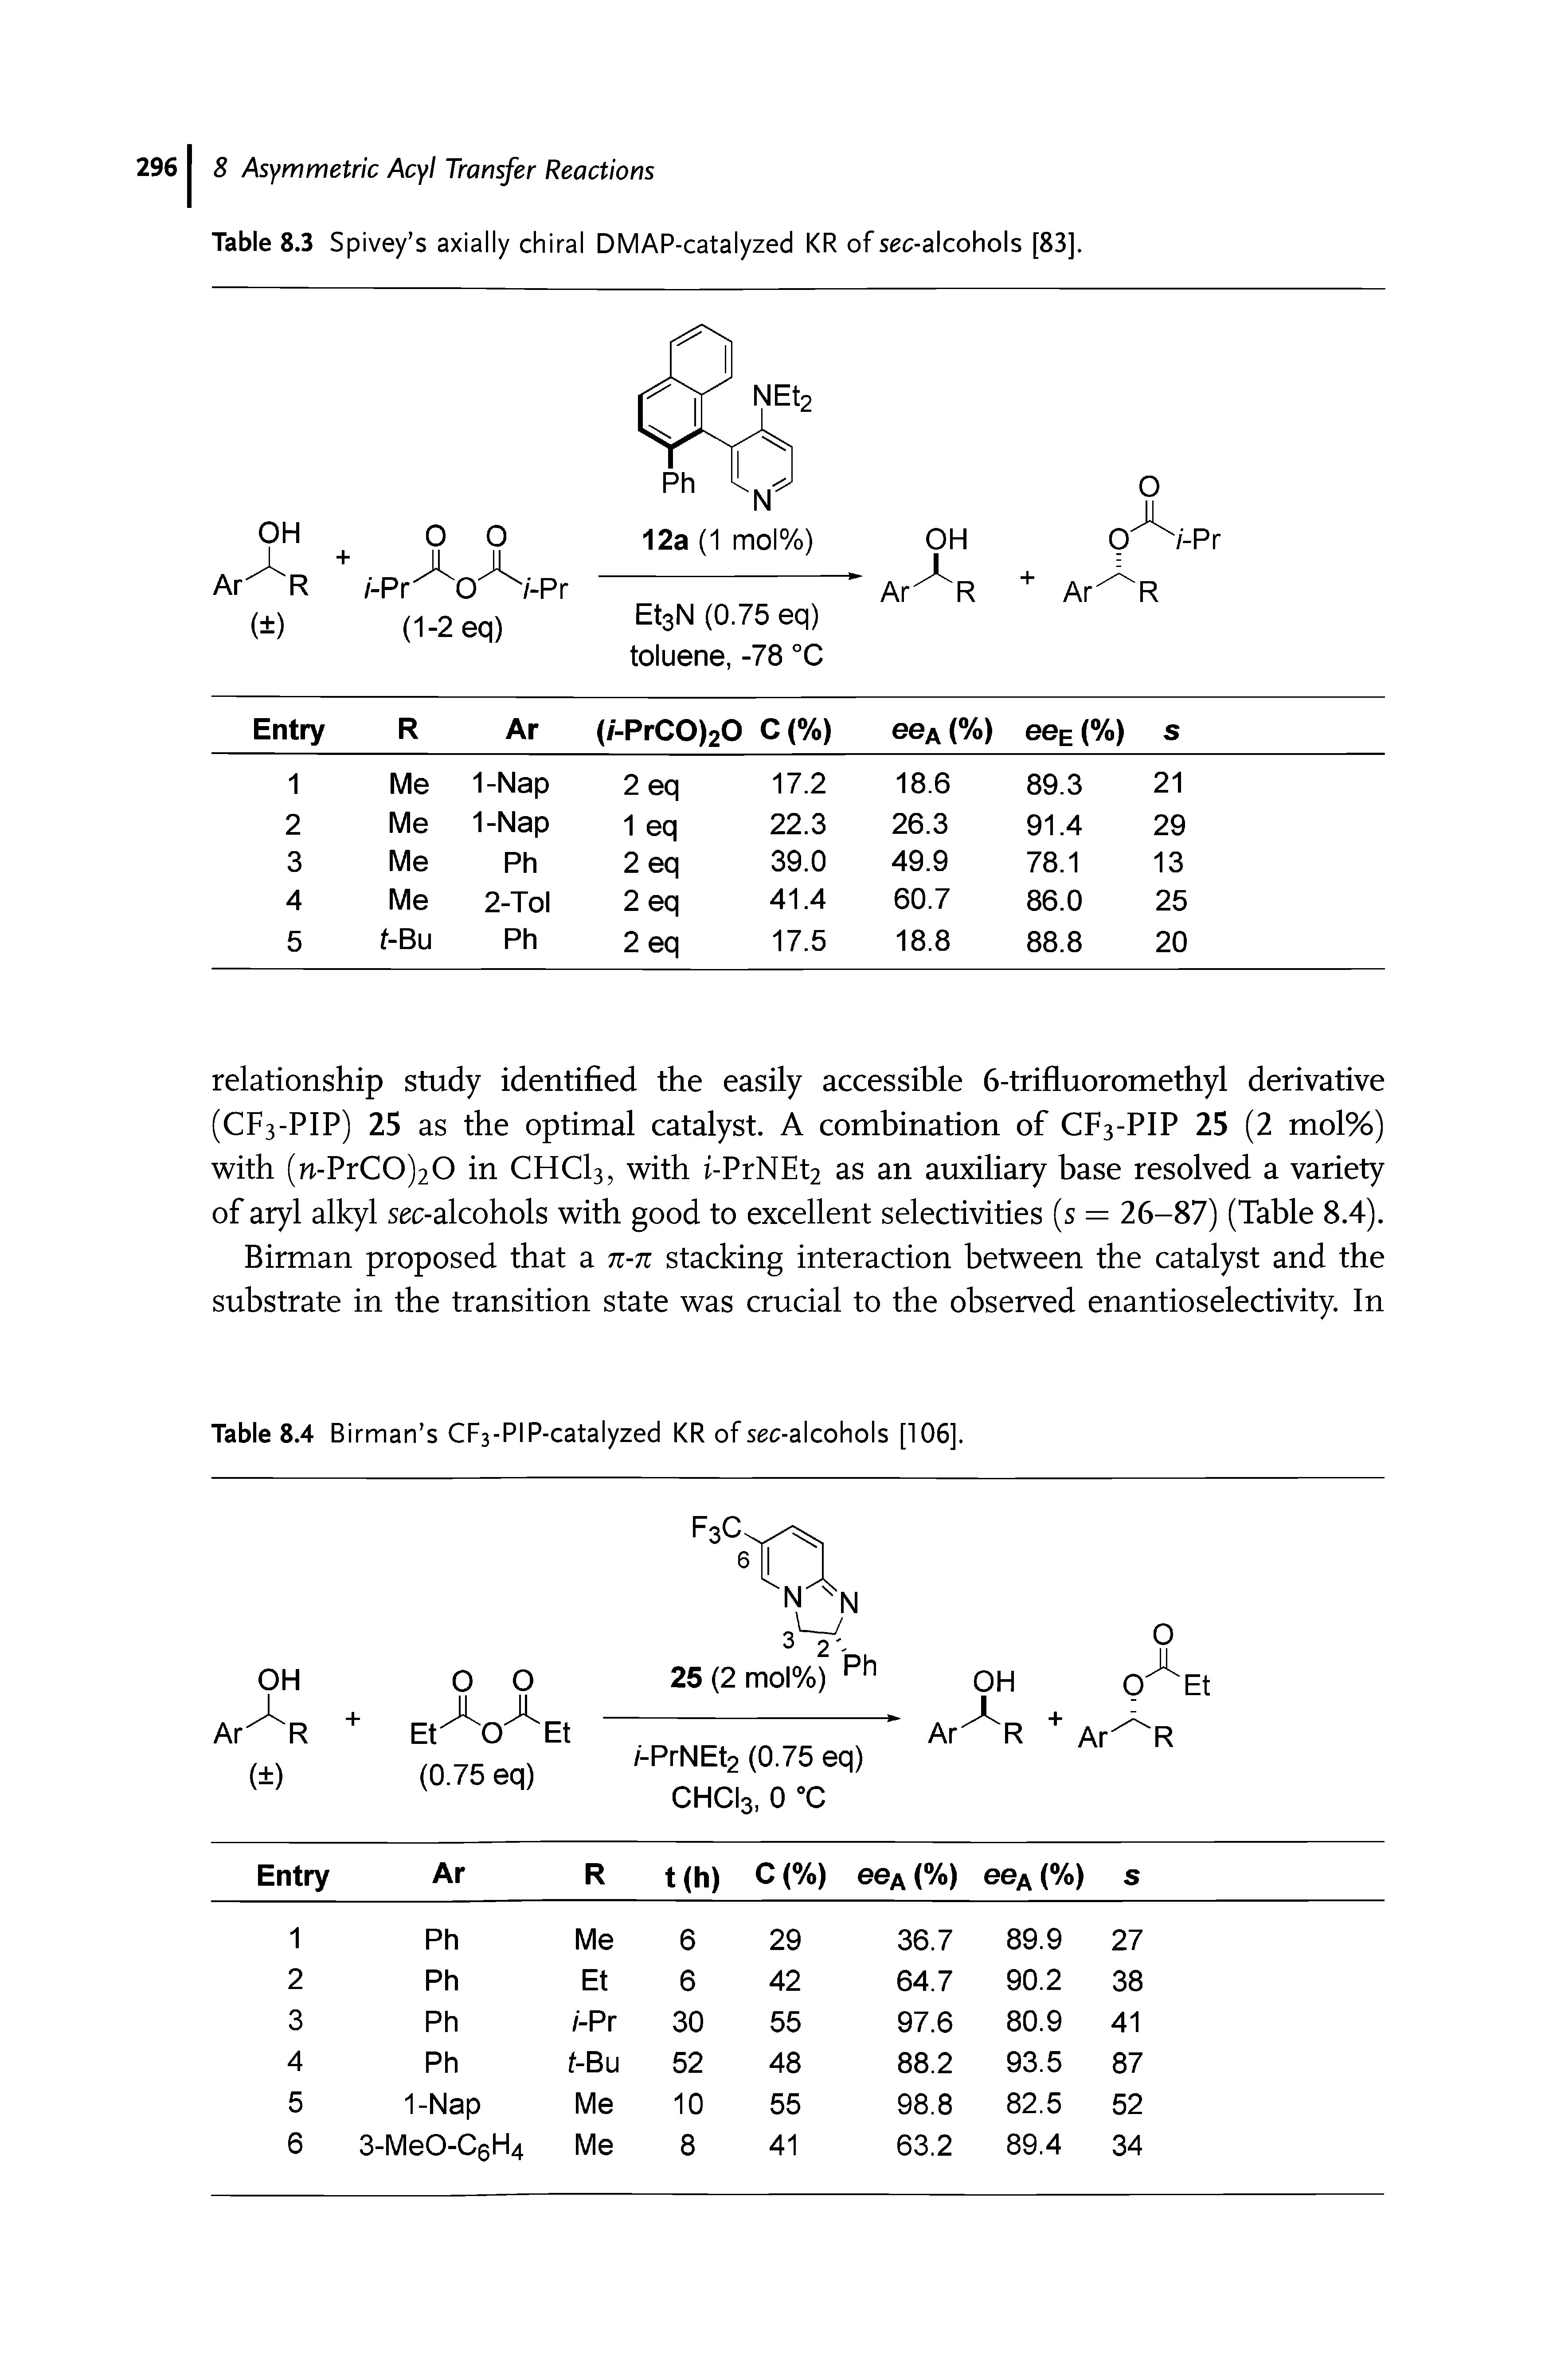 Table 8.3 Spivey s axially chiral DMAP-catalyzed KR of sec-alcohols [83].